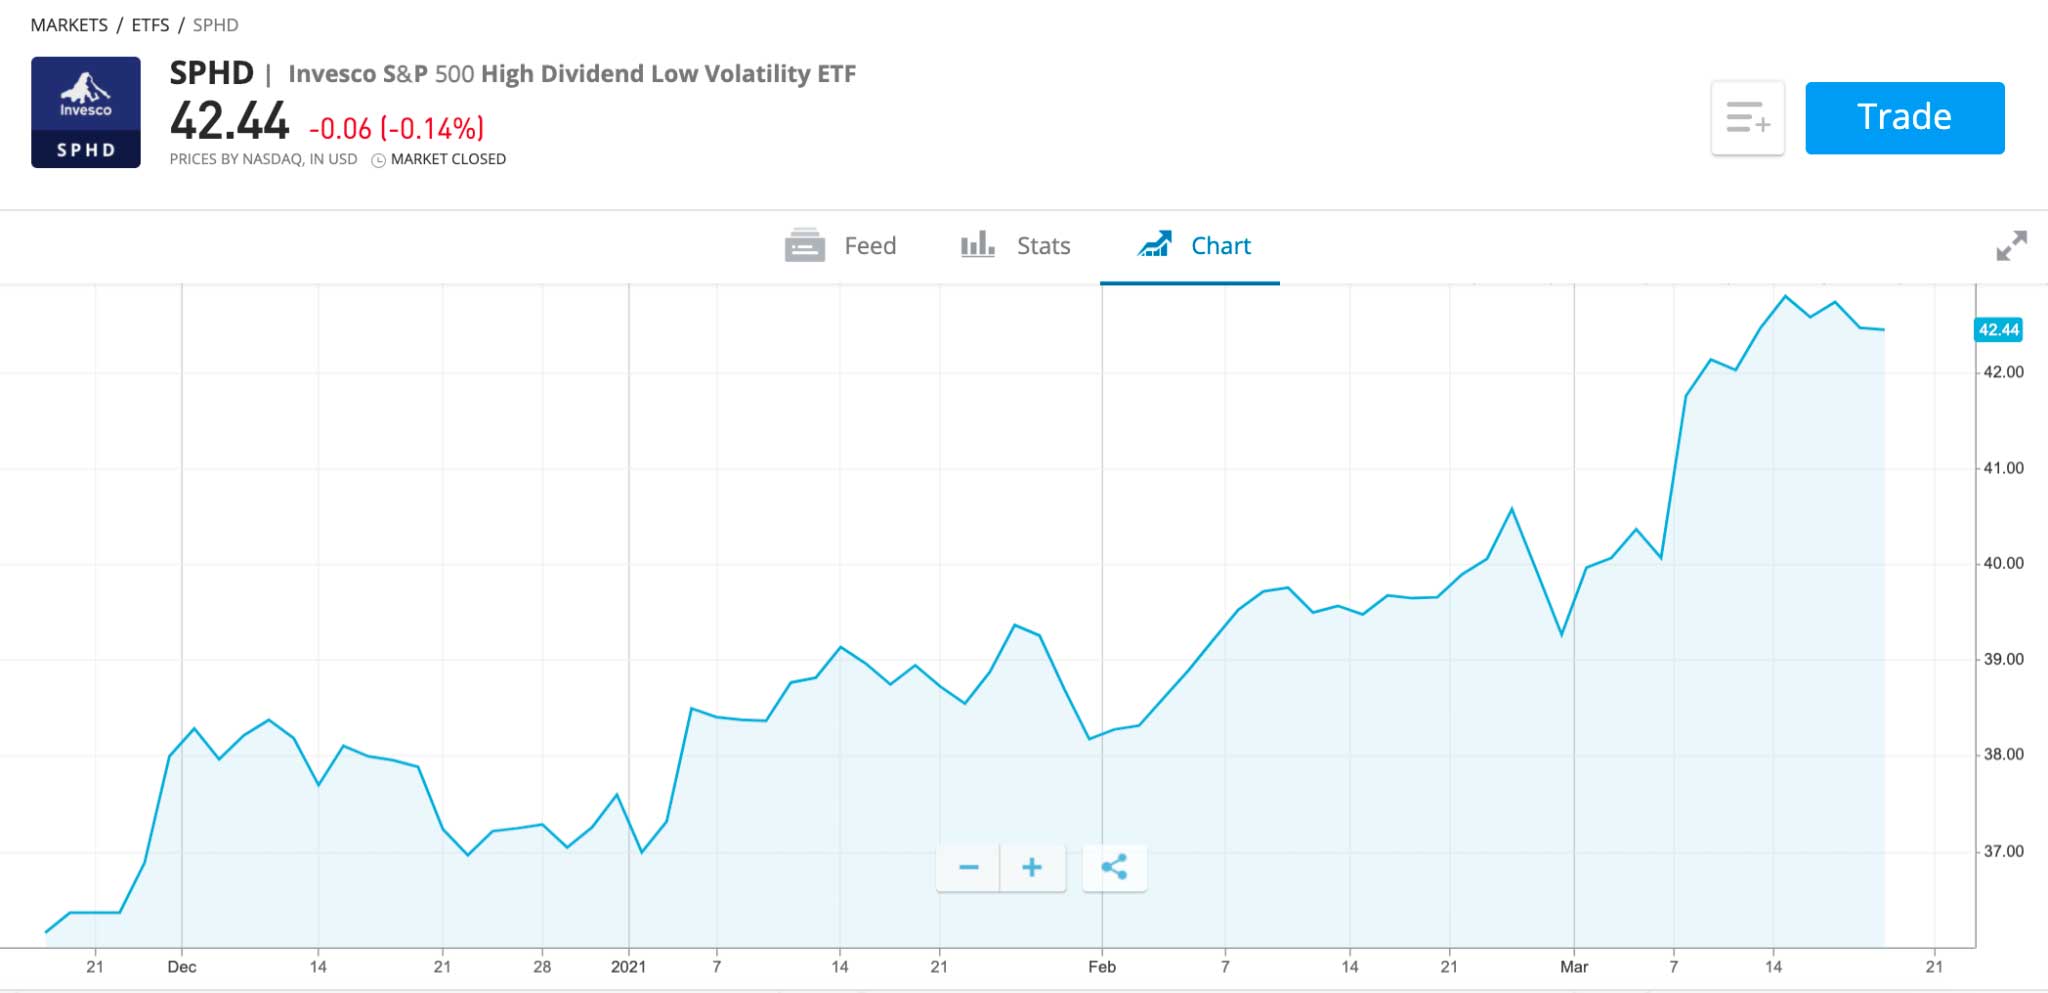 Invesco S&P 500 High Dividend Low Volatility ETF